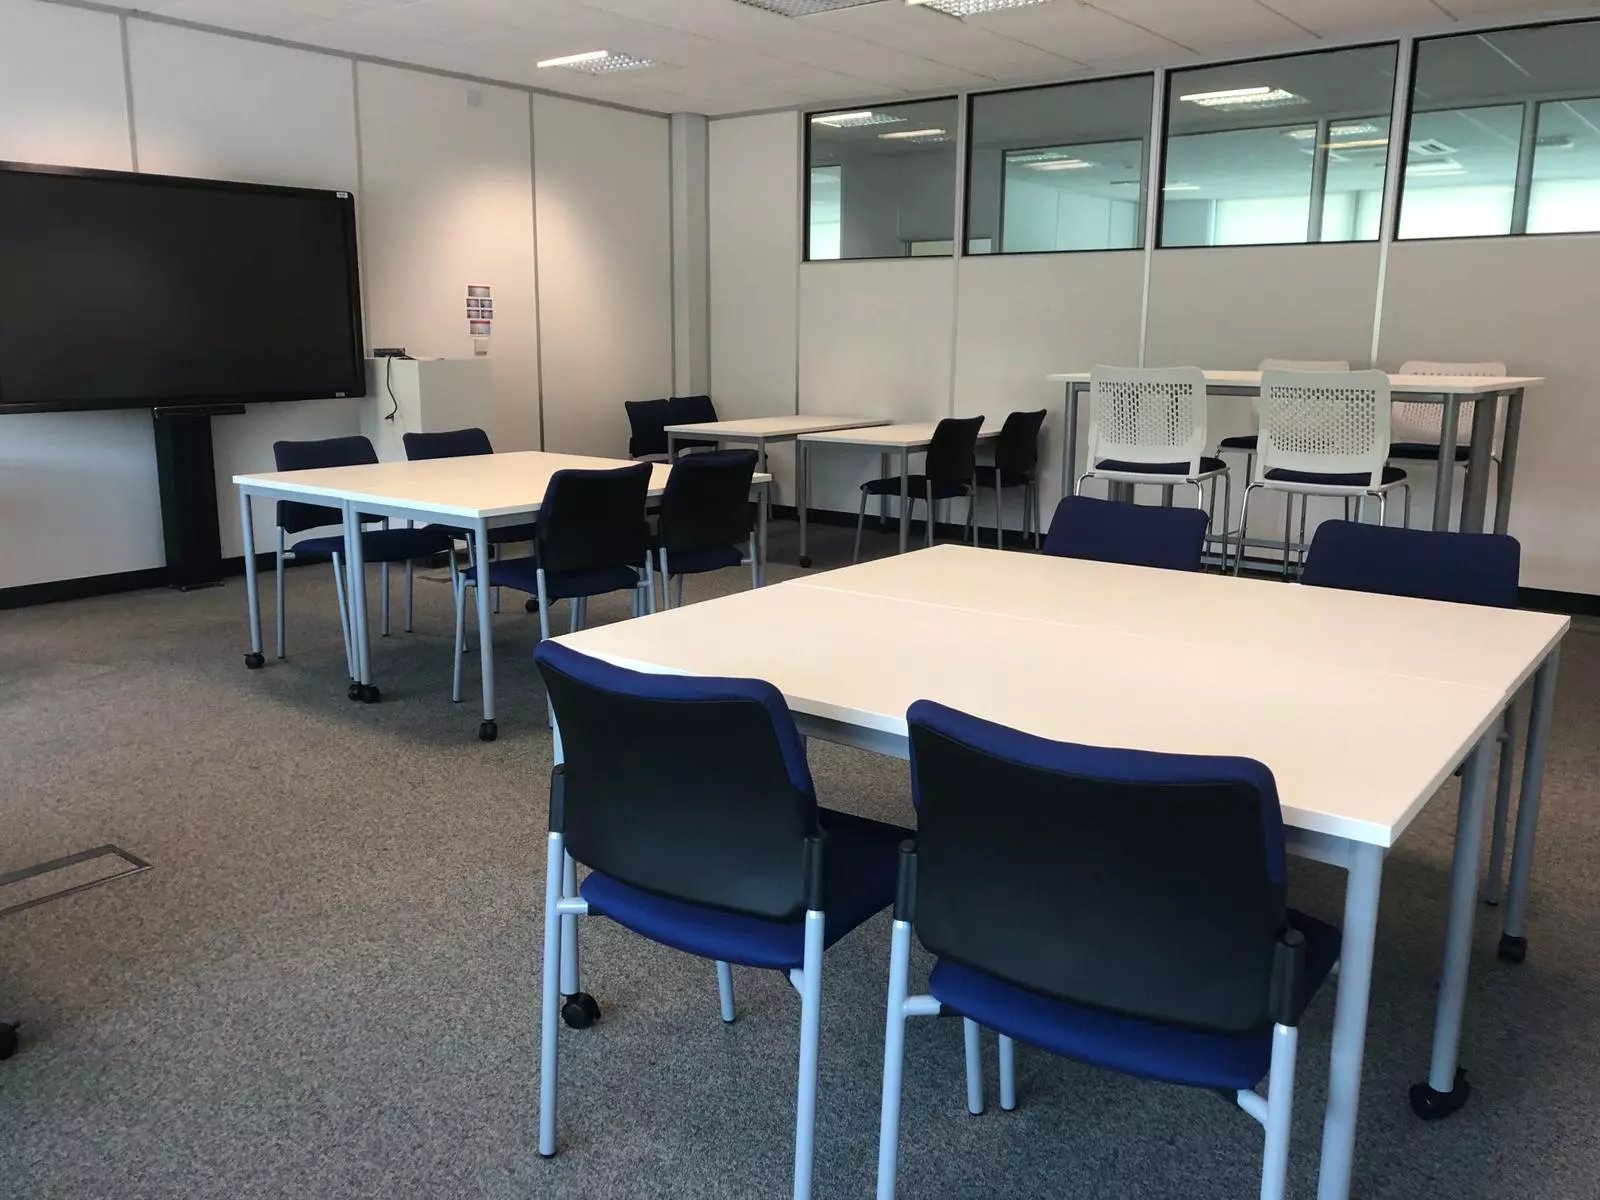 Large college refurb 1 from aci